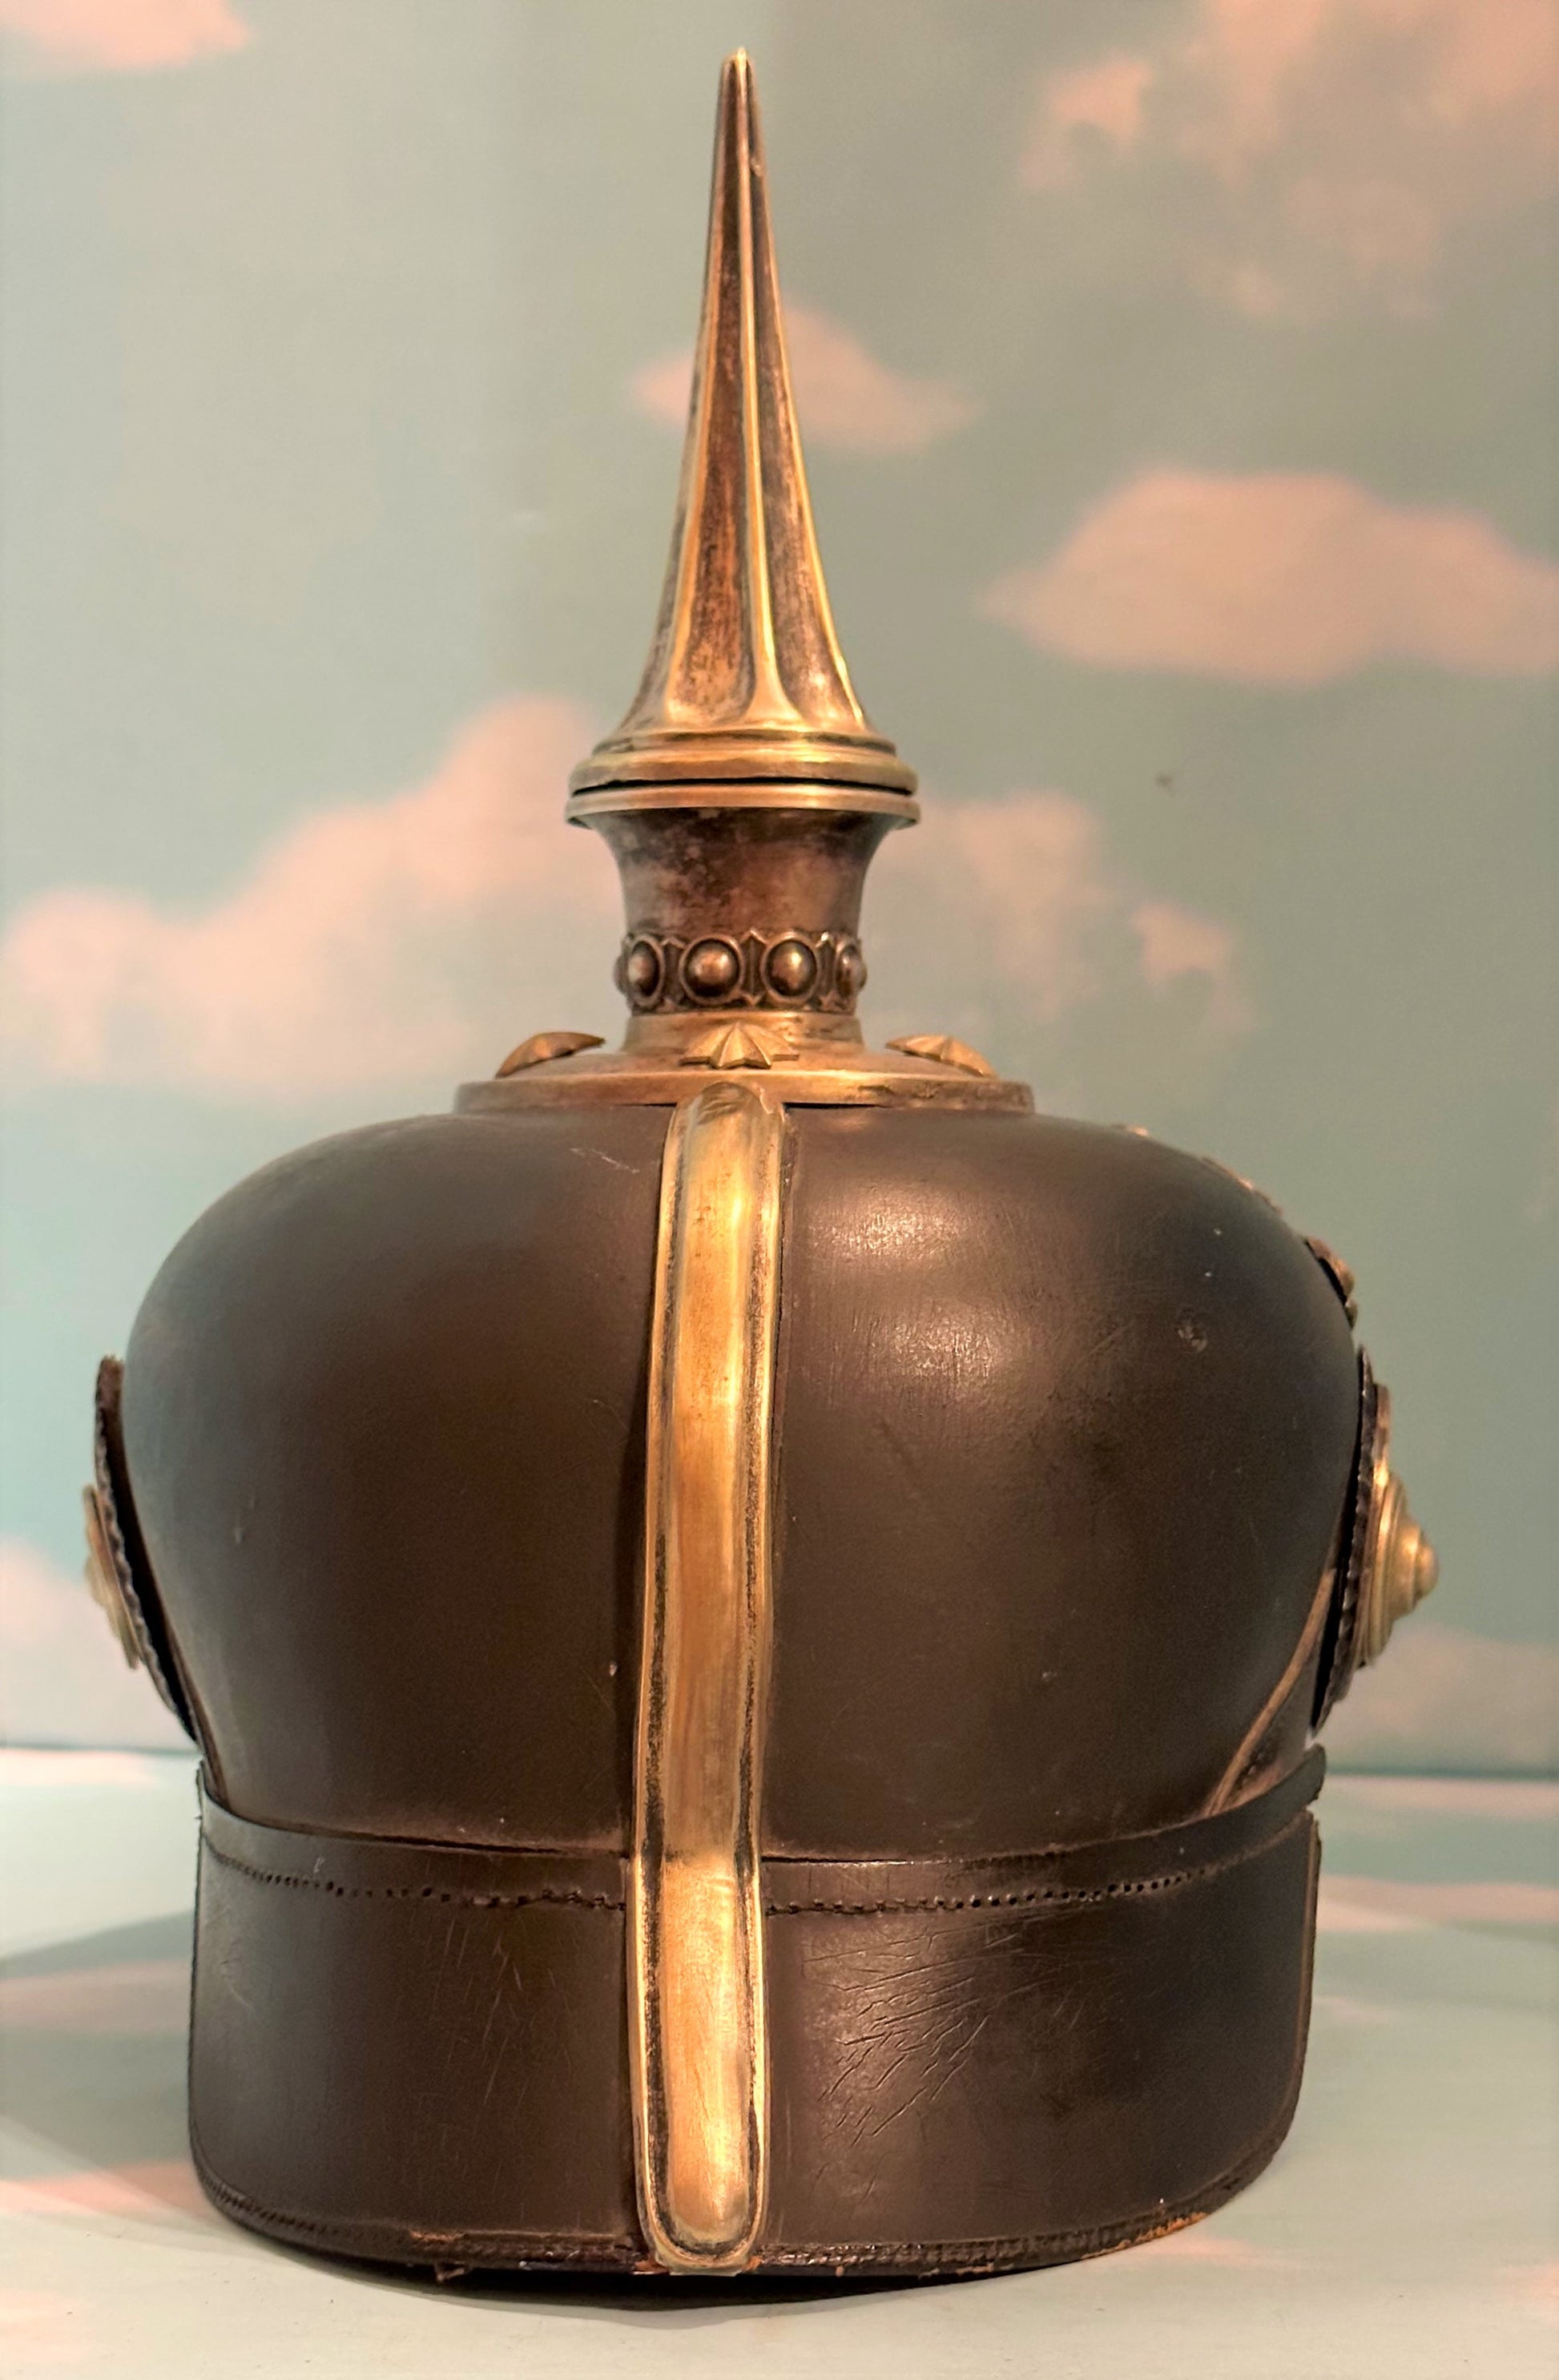 Prussia Pickelhaube / Spiked Helmet for Officer in 1. Garde Rgt Zu Fus with Semper Talis Bandeau - Derrittmeister Militaria Group